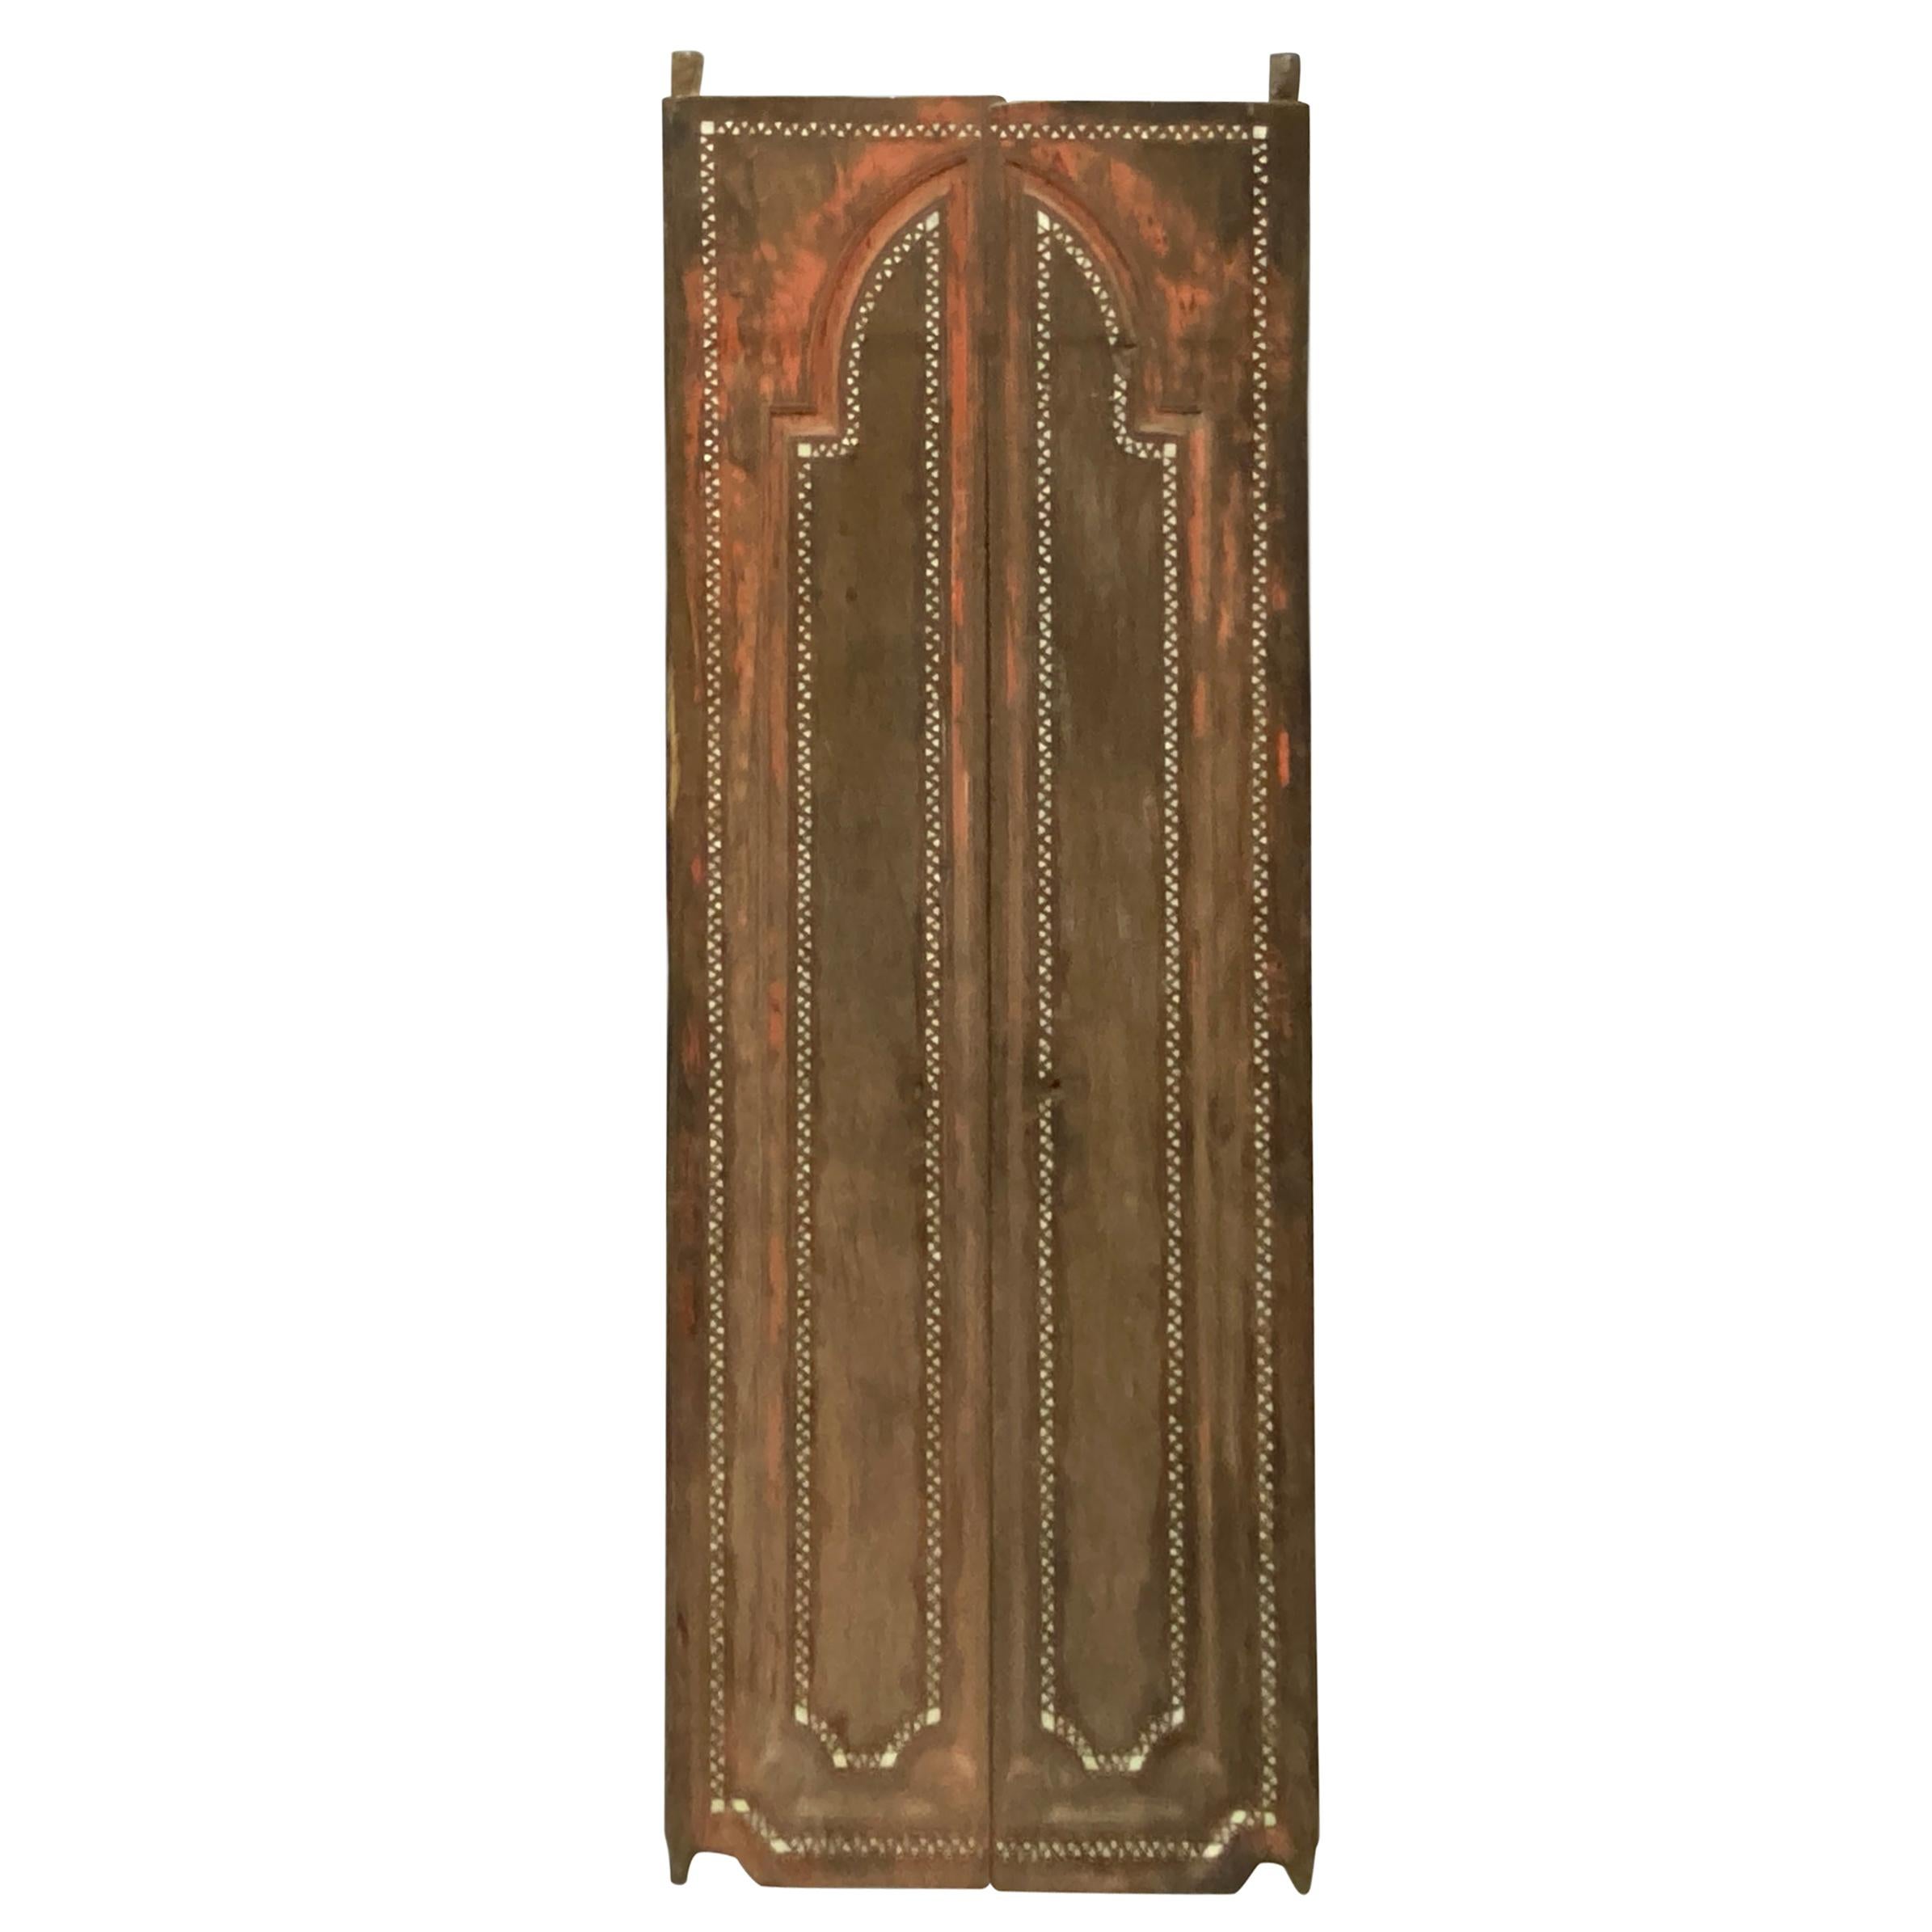 Andrianna Shamaris Antique Temple Door with Shell Inlay